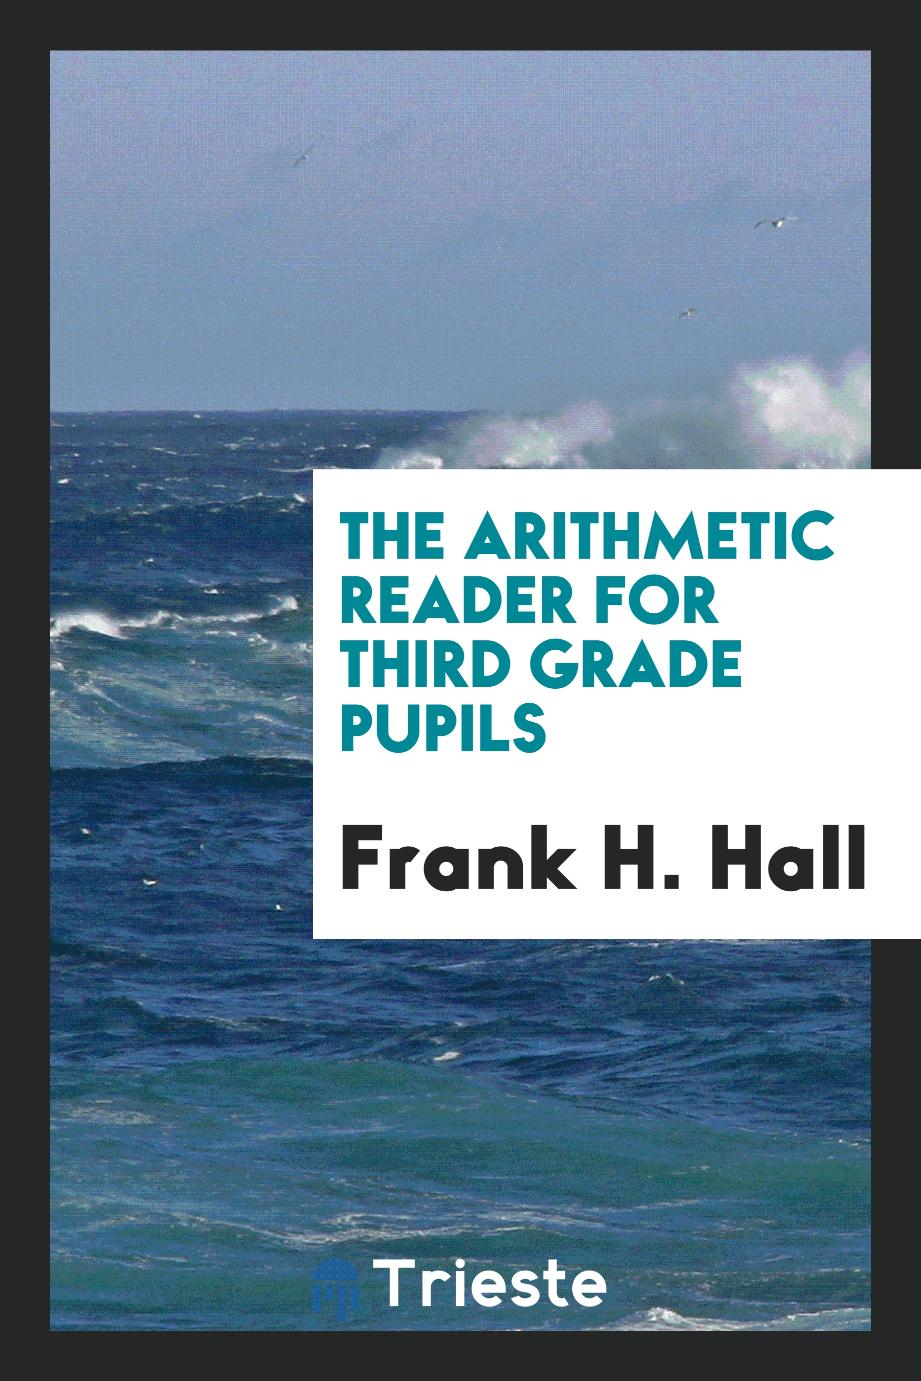 The Arithmetic Reader for Third Grade Pupils